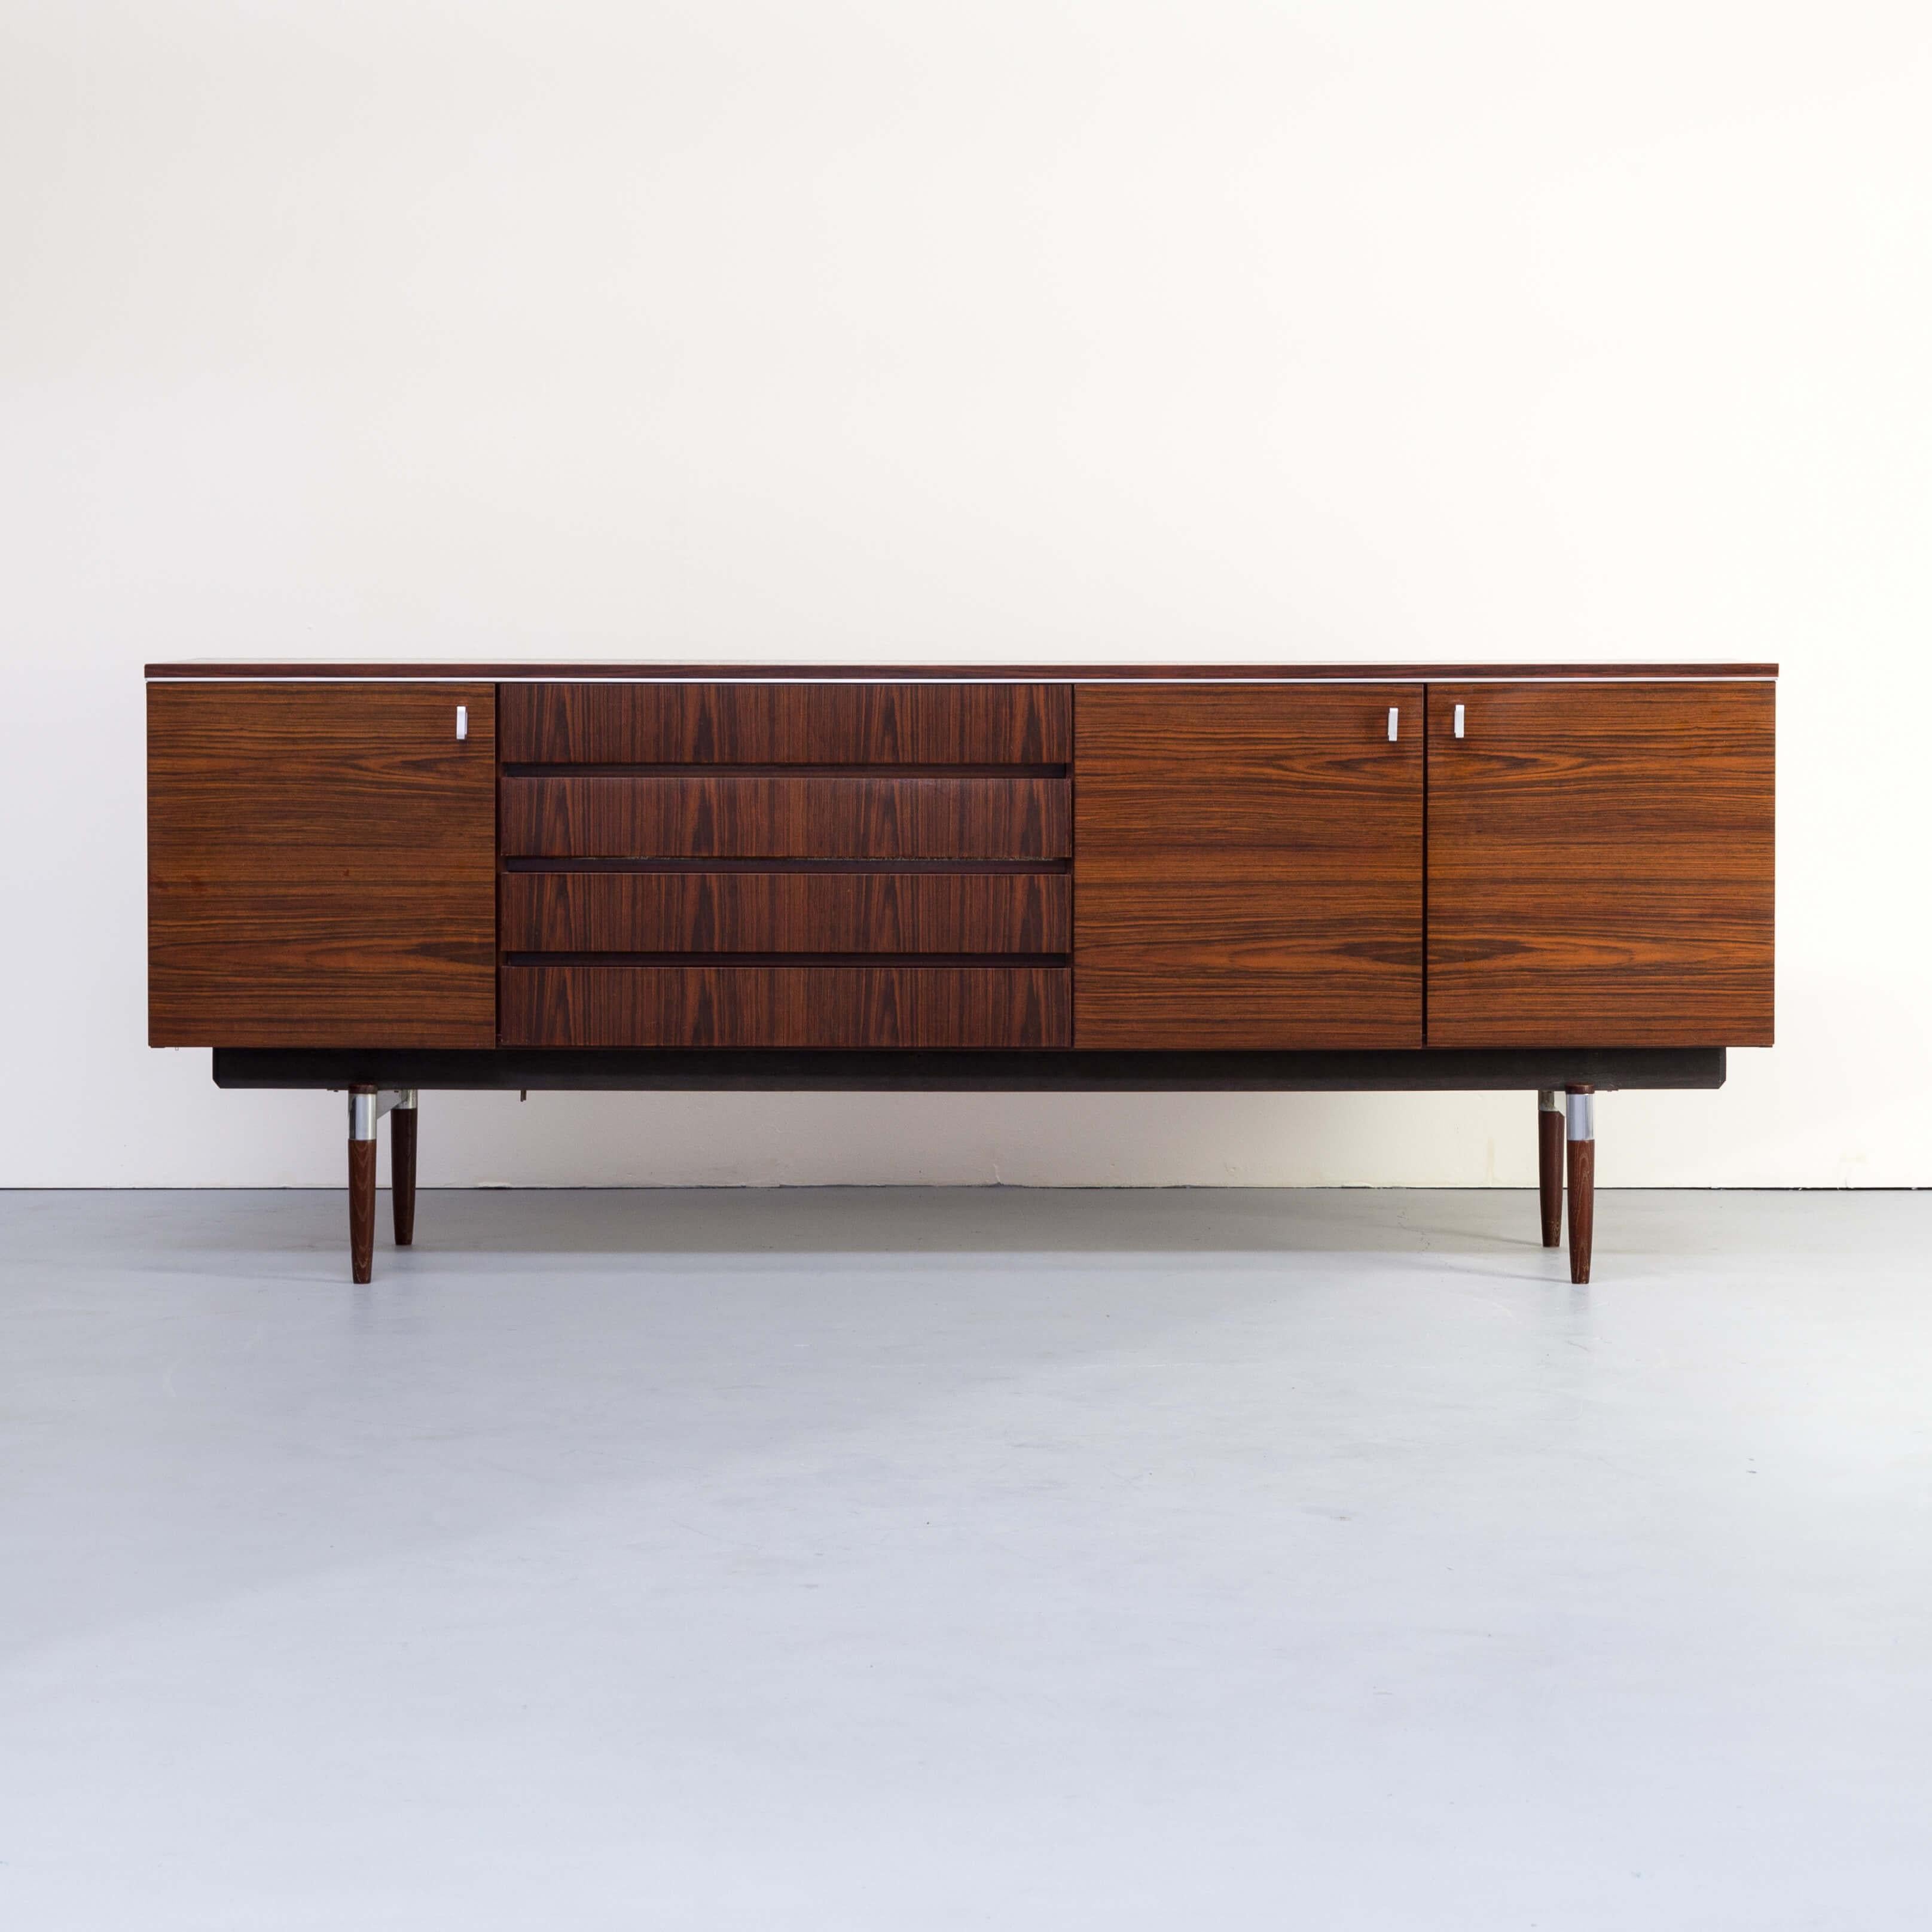 1960s Dutch modernist design rosewood veneer sideboard. Modernist 213cm wide sideboard, in wood veneer. In the innerside of the sideboard there is a working lamp mounted as an extra. The sideboard is beautifull carried on a wood and aluminium foot.